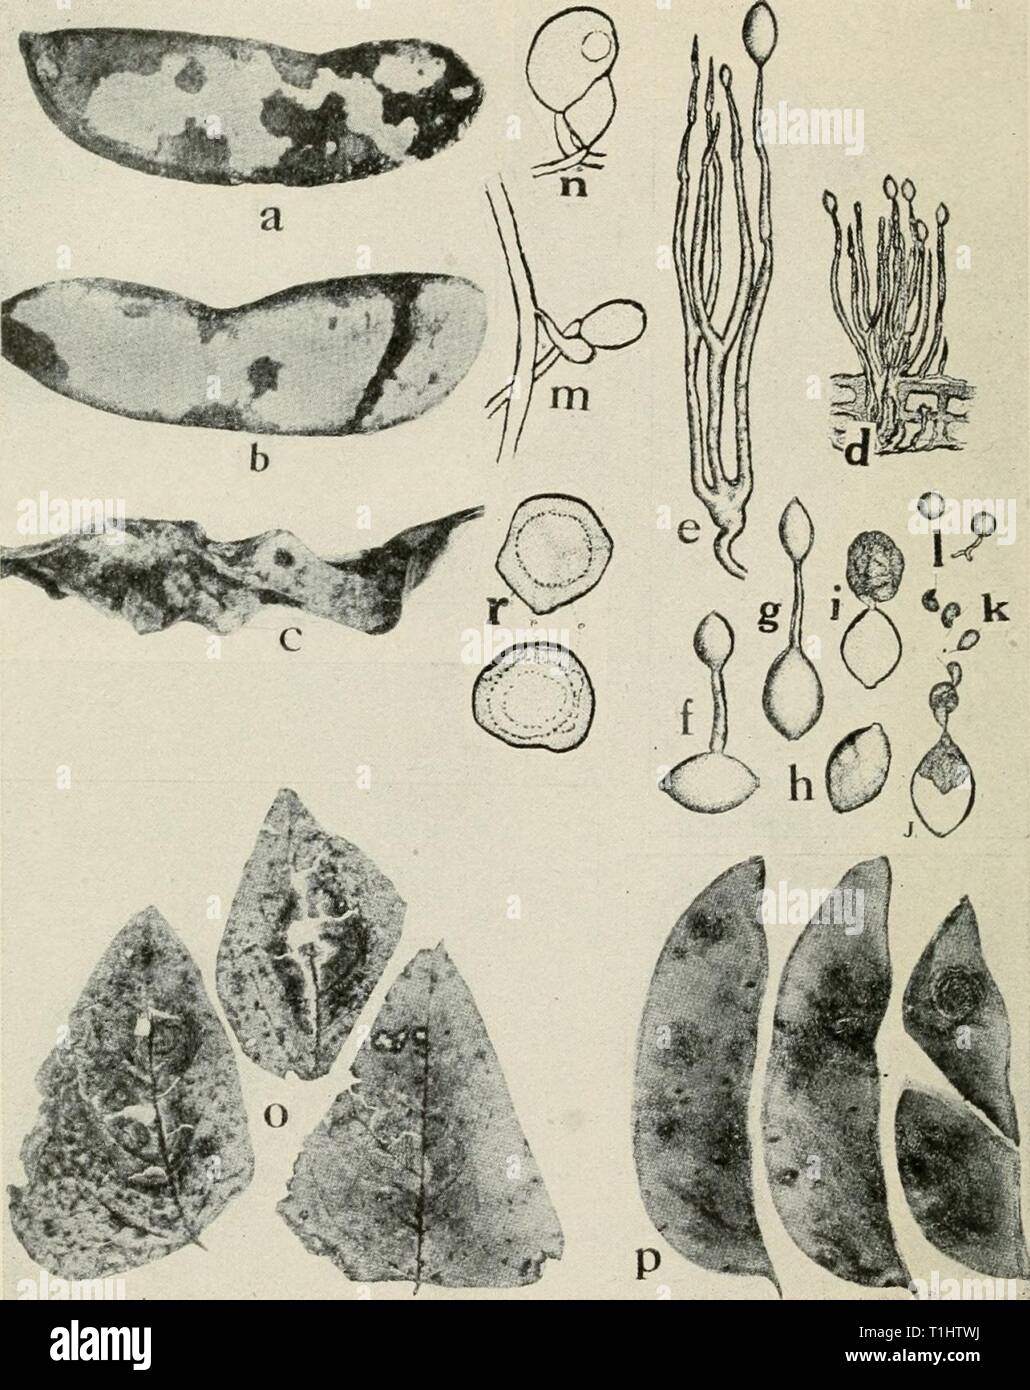 Diseases of truck crops and Diseases of truck crops and their control  diseasesoftruckc00taub Year: 1918  Fig. 48. Diseases of Lima Bean. a. h. c. different stages of downy mildew on pods, d. tuft of conidiophores and conidia of Phythophthora phaseoli, e. same as d. but greatly enlarged, /. g. conidia germinating by means of a germ tube, h. i. j. k. germination of conidia by means of zoospores, /. germinating zoospores {d. to /. after Thaxter), m. n. fertilization of the oogonium by the antheridium, o. Phoma blight on foliage, p. Phoma blight on pods (o. and p. after Halsted), r. mature oospor Stock Photo